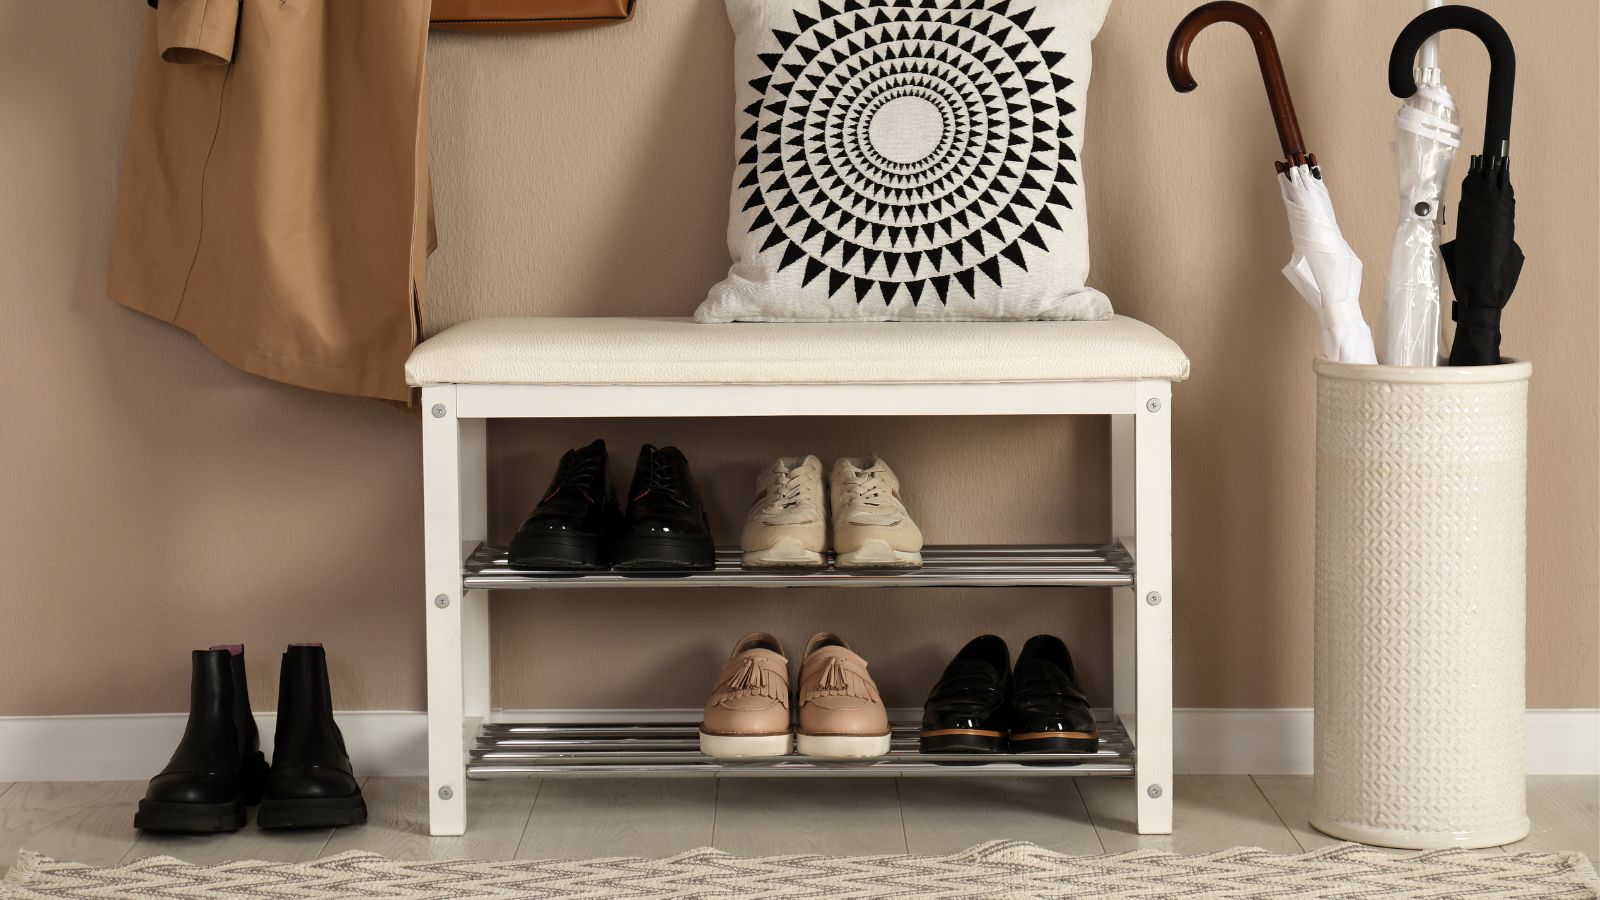 How to organize shoes in a small space, according to pros |